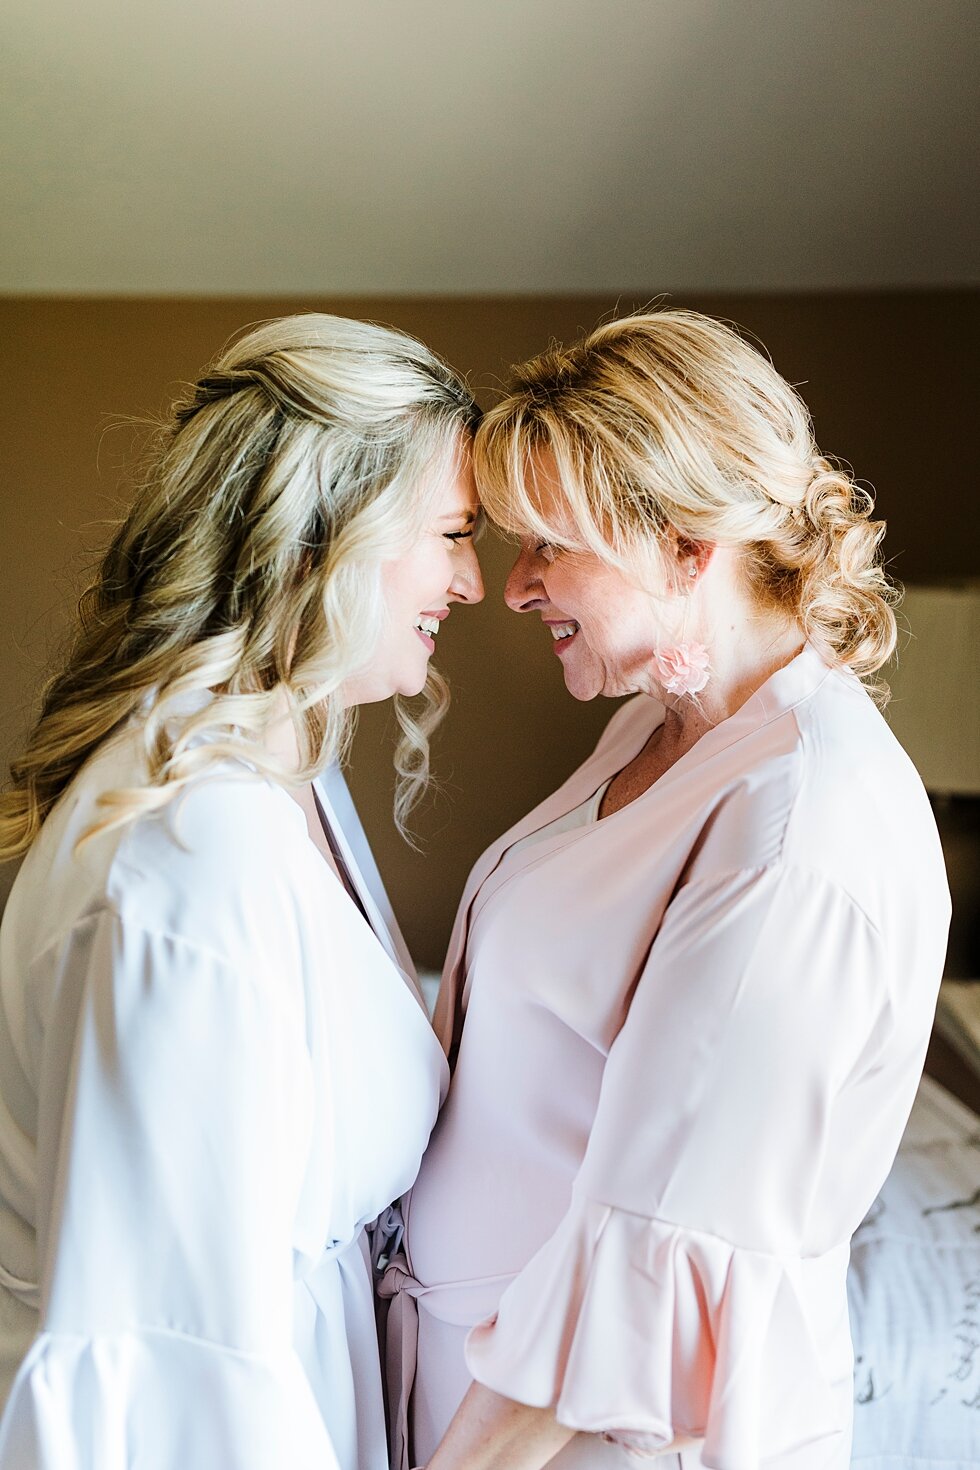  Beautiful mother and daughter getting ready for such a special wedding in Louisville, Kentucky! Romantic casual lace wedding gown close friends neutral colors background wedding natural greenery crisp white #midwestphotographer #kywedding #louisvill